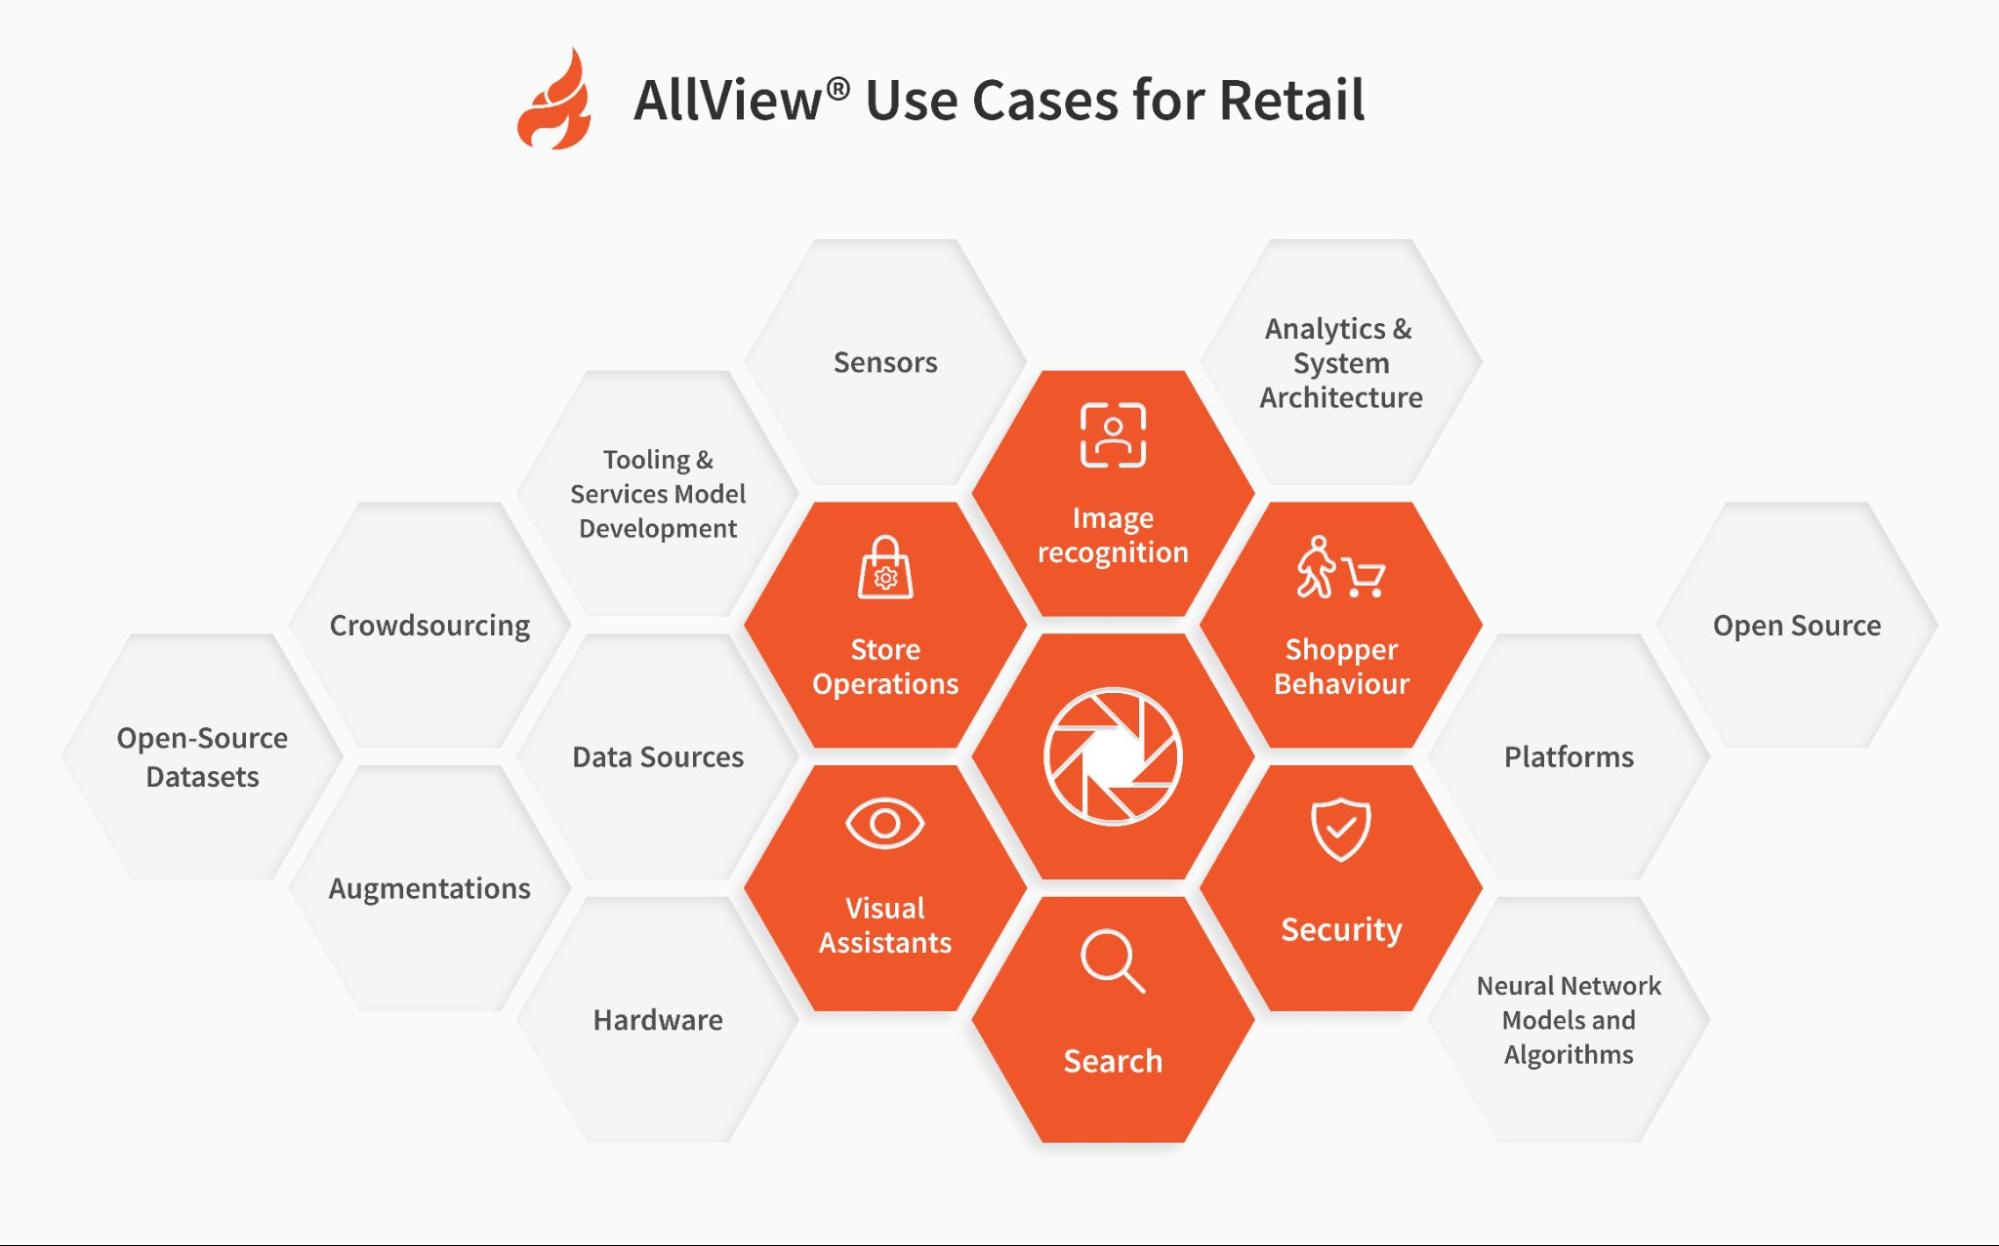 AllView Use Cases for Retail